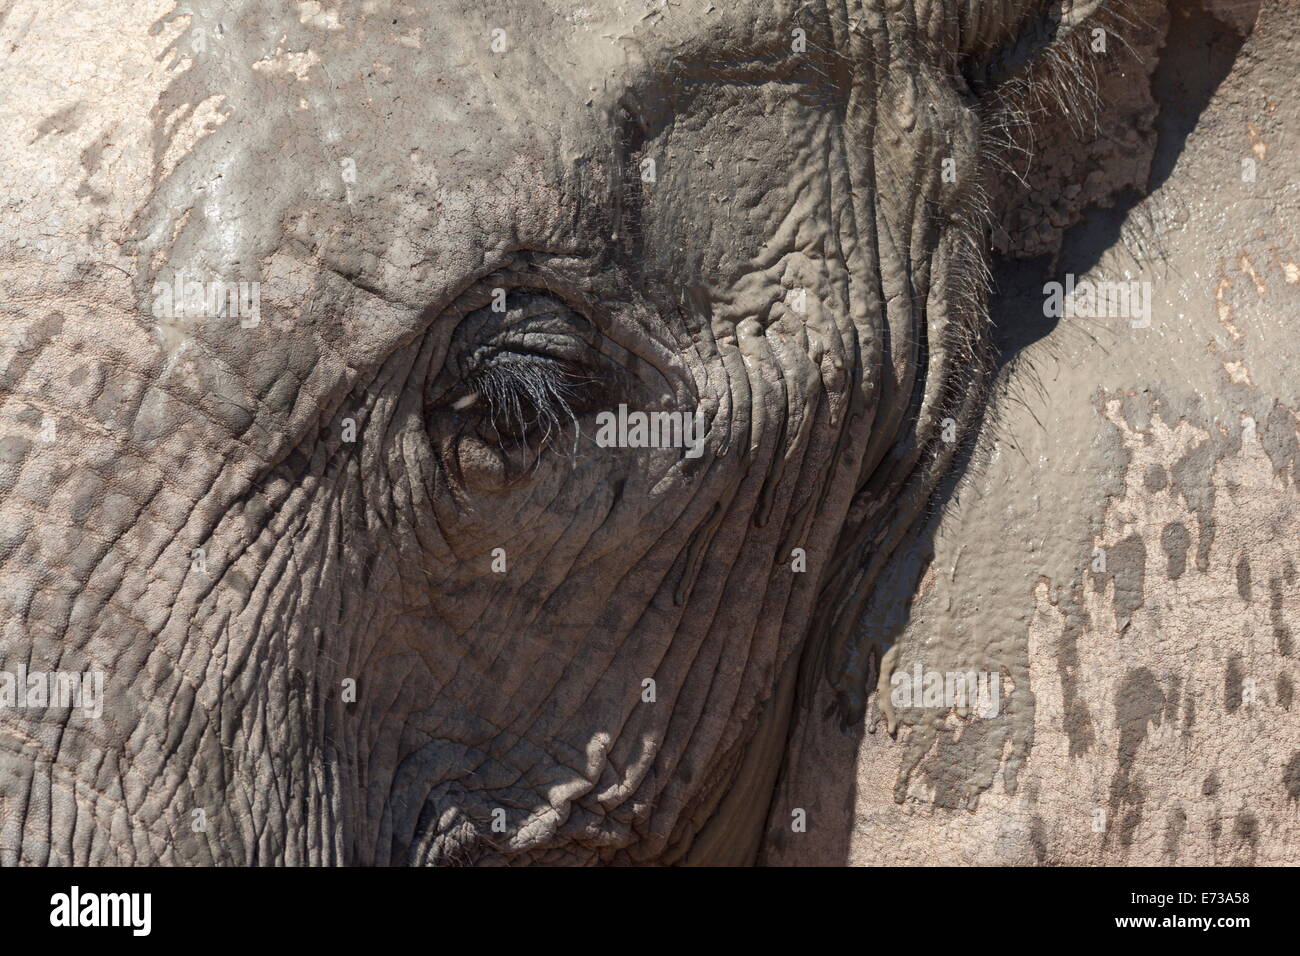 African elephant head and skin detail (Loxodonta africana), Addo Elephant National Park, South Africa, Africa Stock Photo